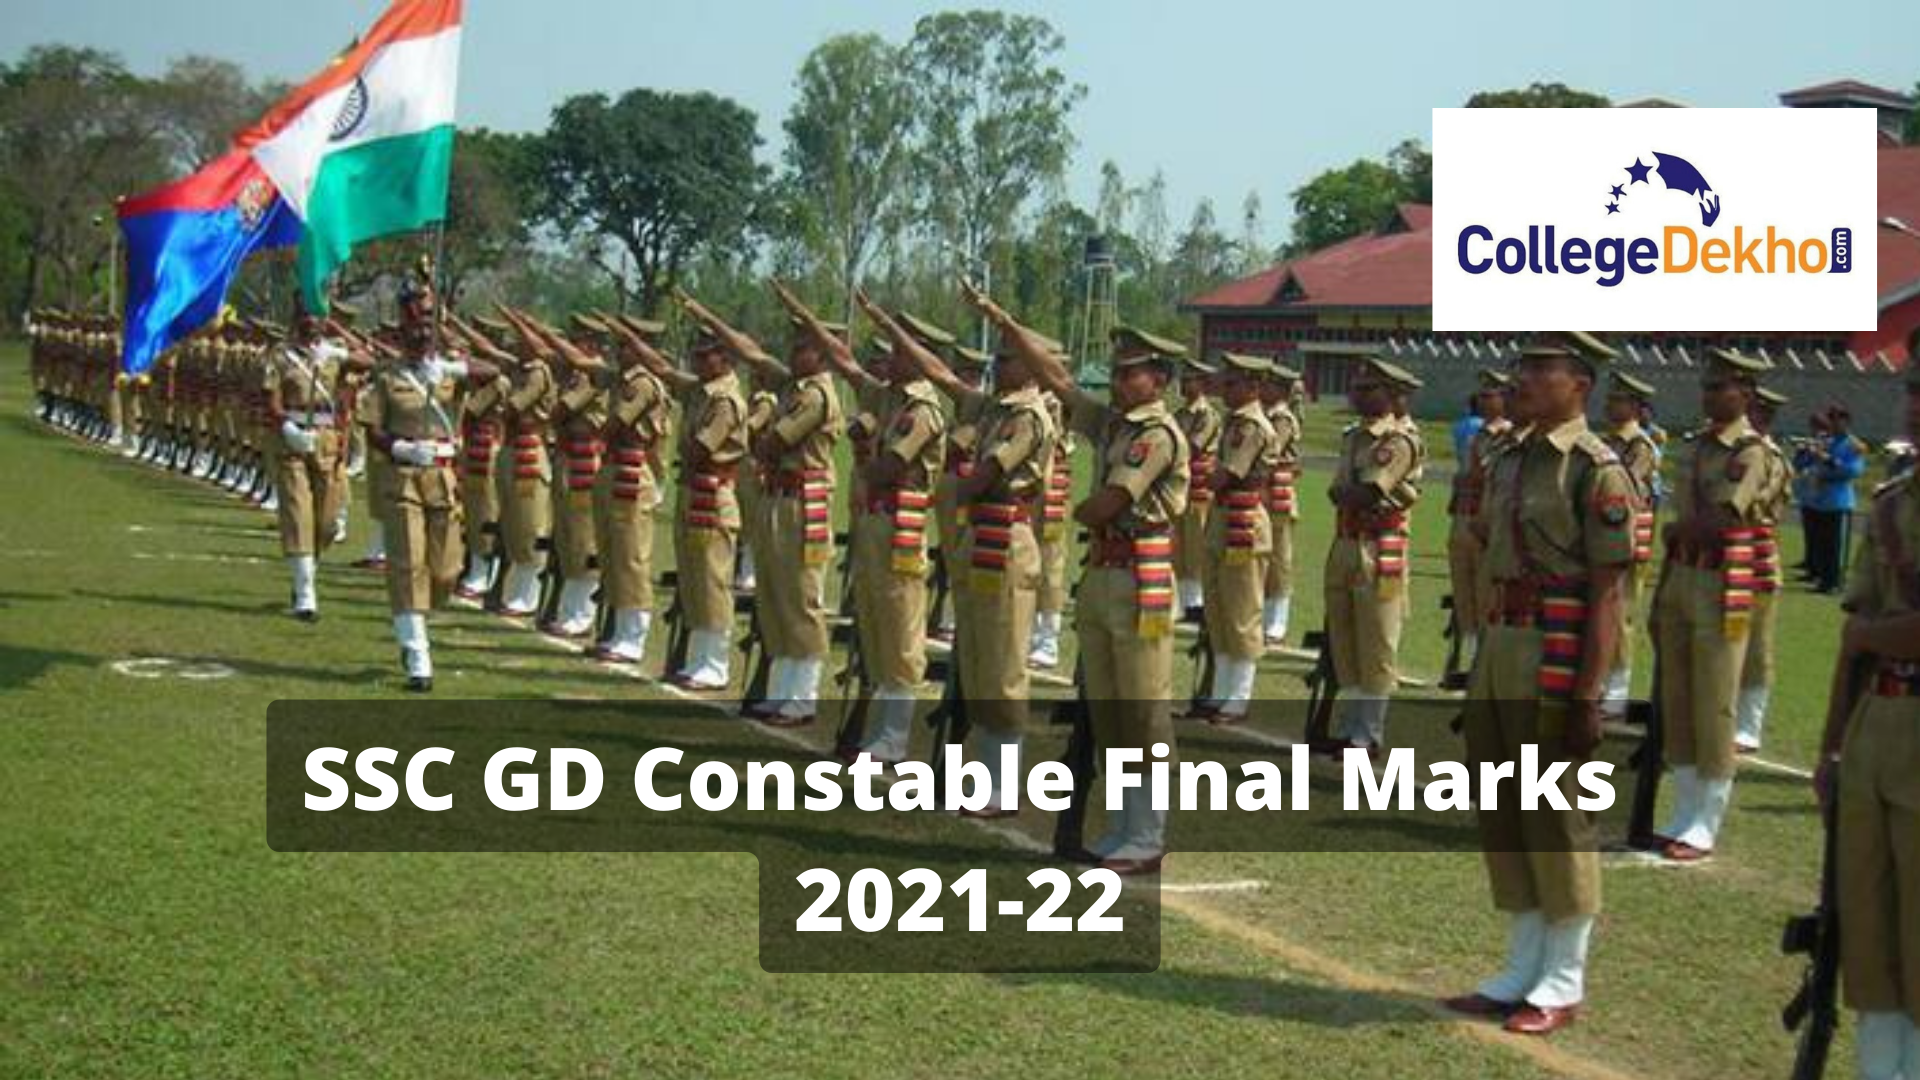 SSC GD Constable Final Marks 2021-22 Released: Direct Download Link Here